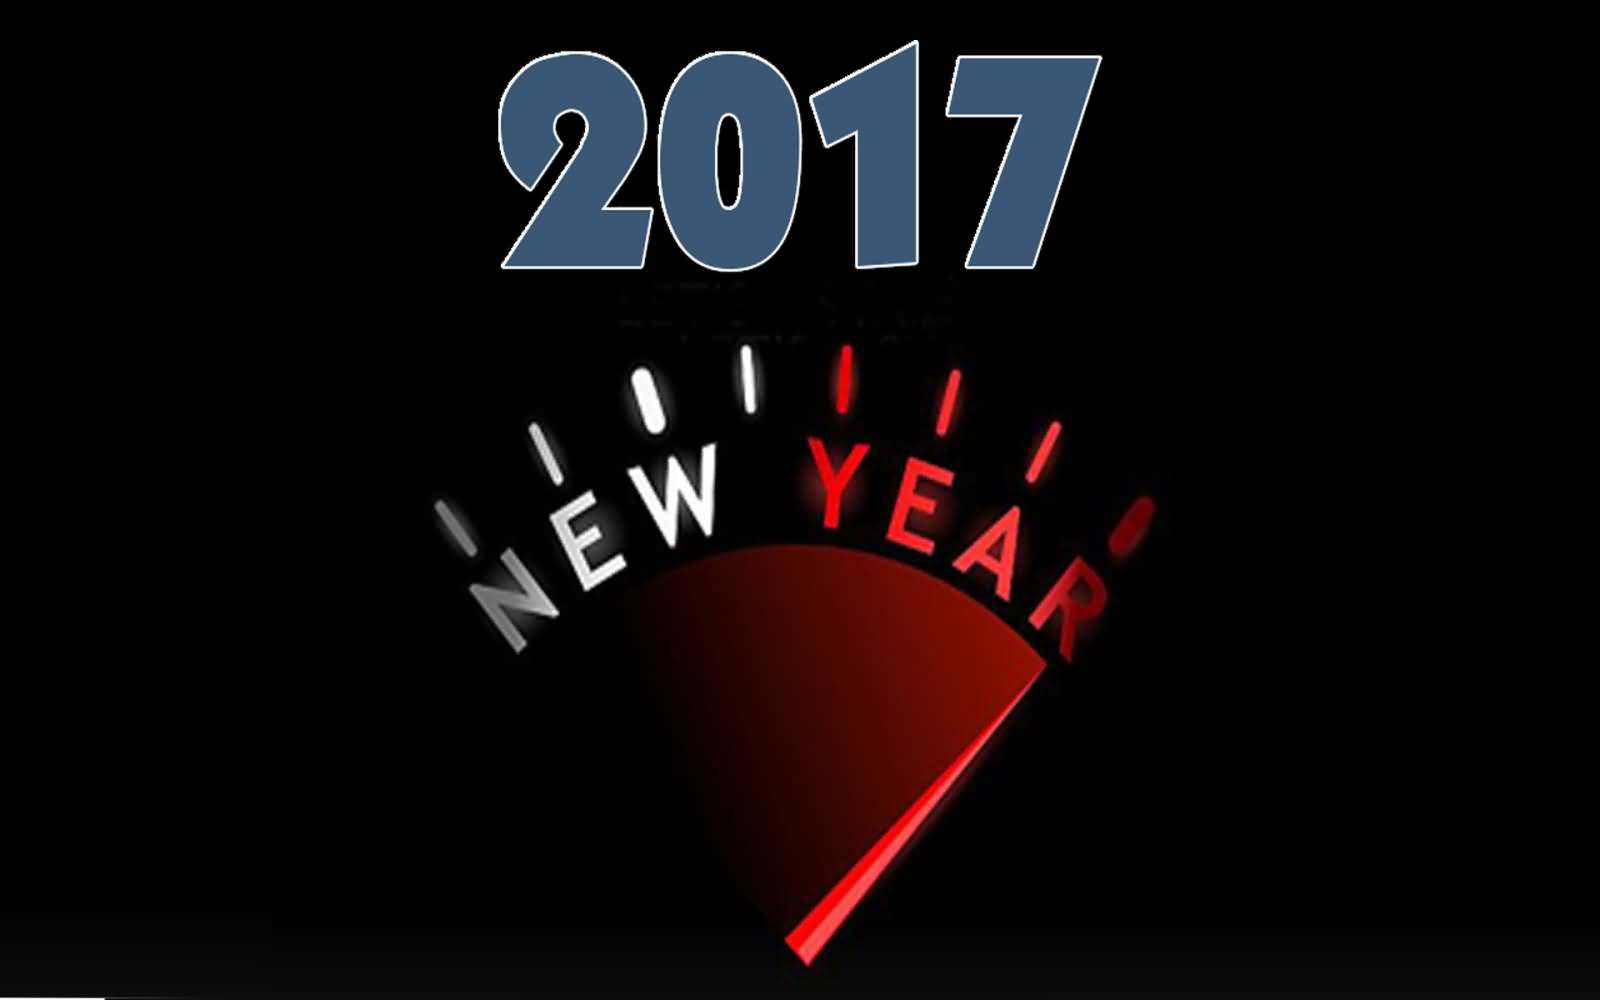 2017 New Year Wishes Meter